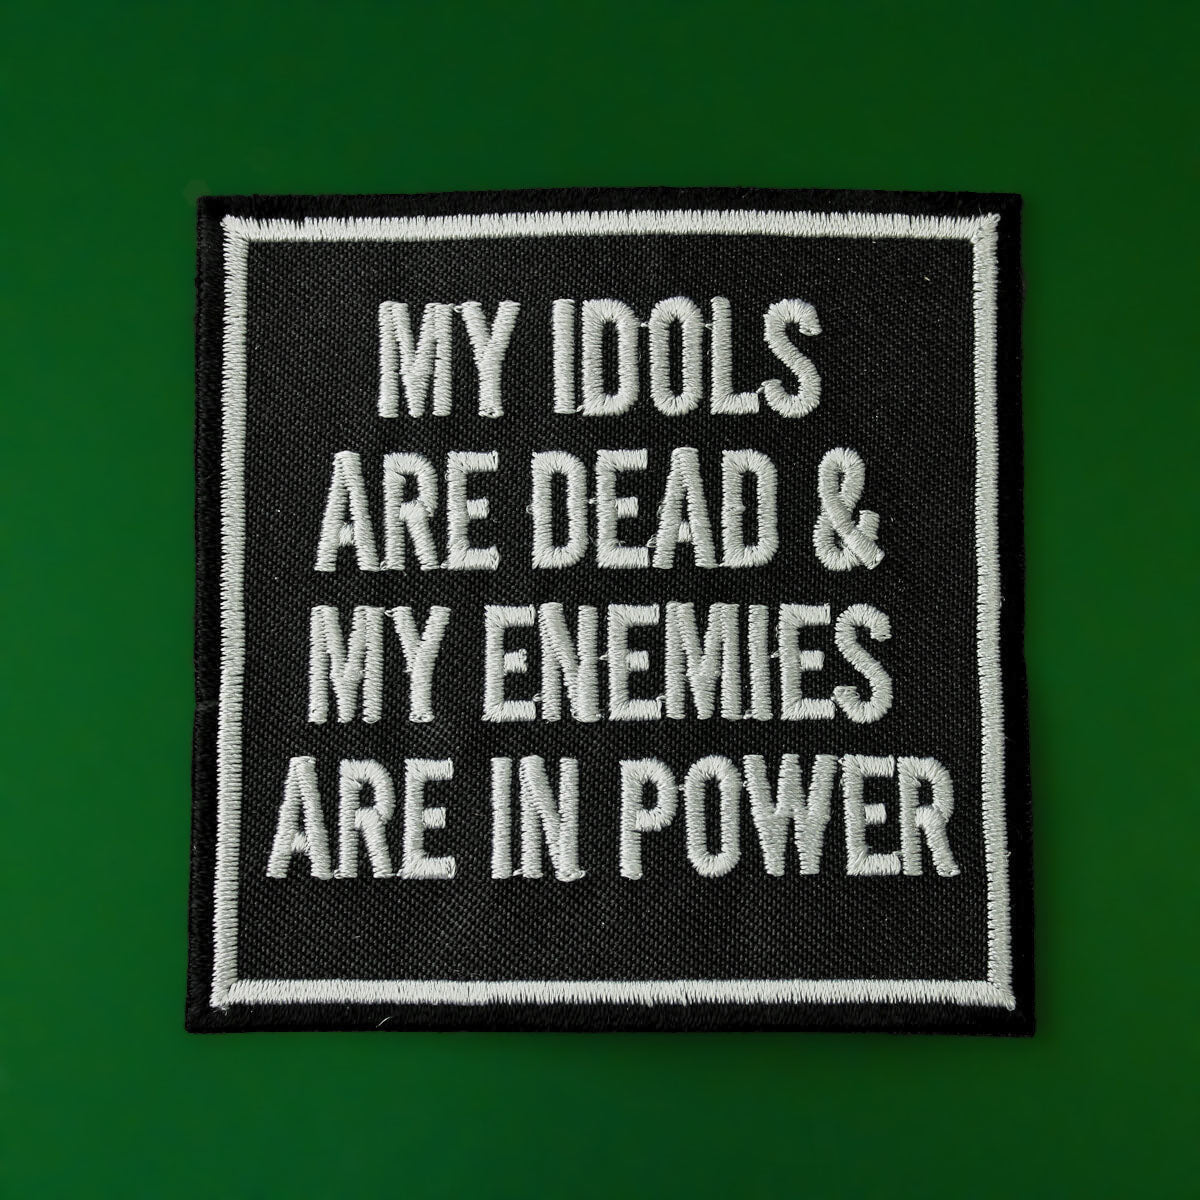 MY IDOLS ARE DEAD & MY ENEMIES ARE IN POWER PATCH - PACK OF 6